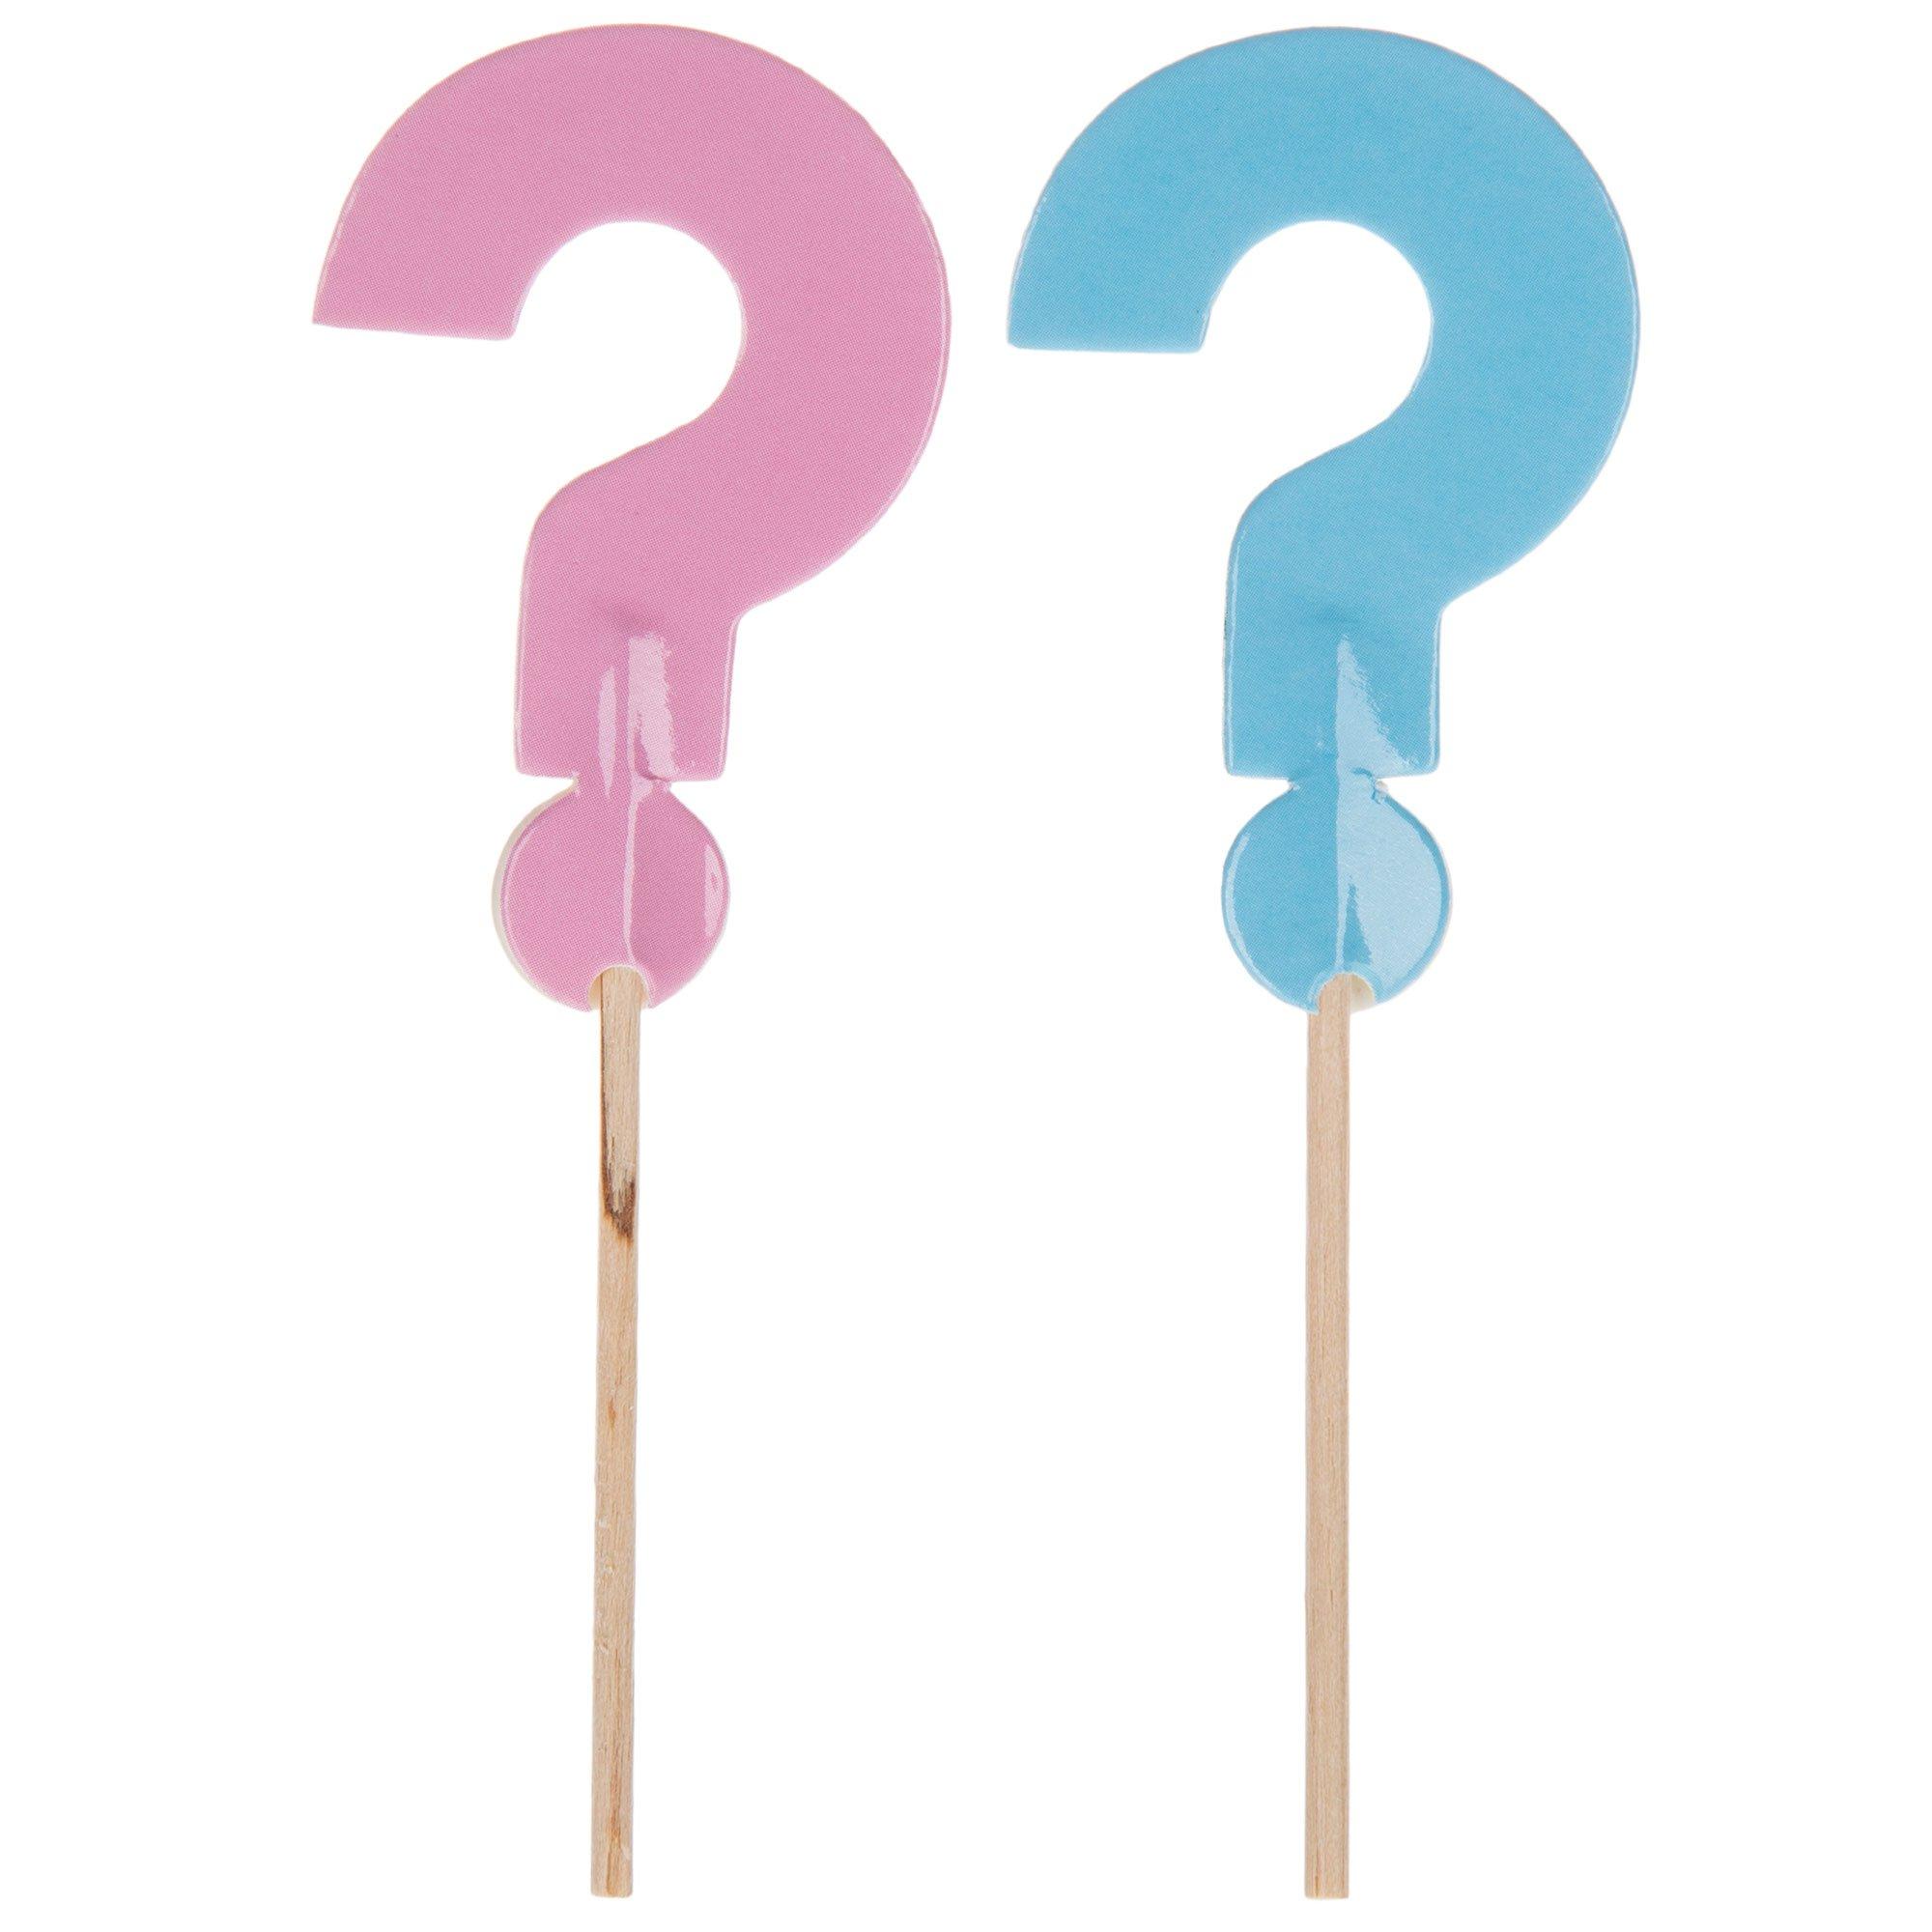 Bobbers or Bows Cupcake Toppers Gender Reveal Cupcake Toppers Gender Reveal  Decorations Gender Reveal Ideas Fishing Bobbers Bows 